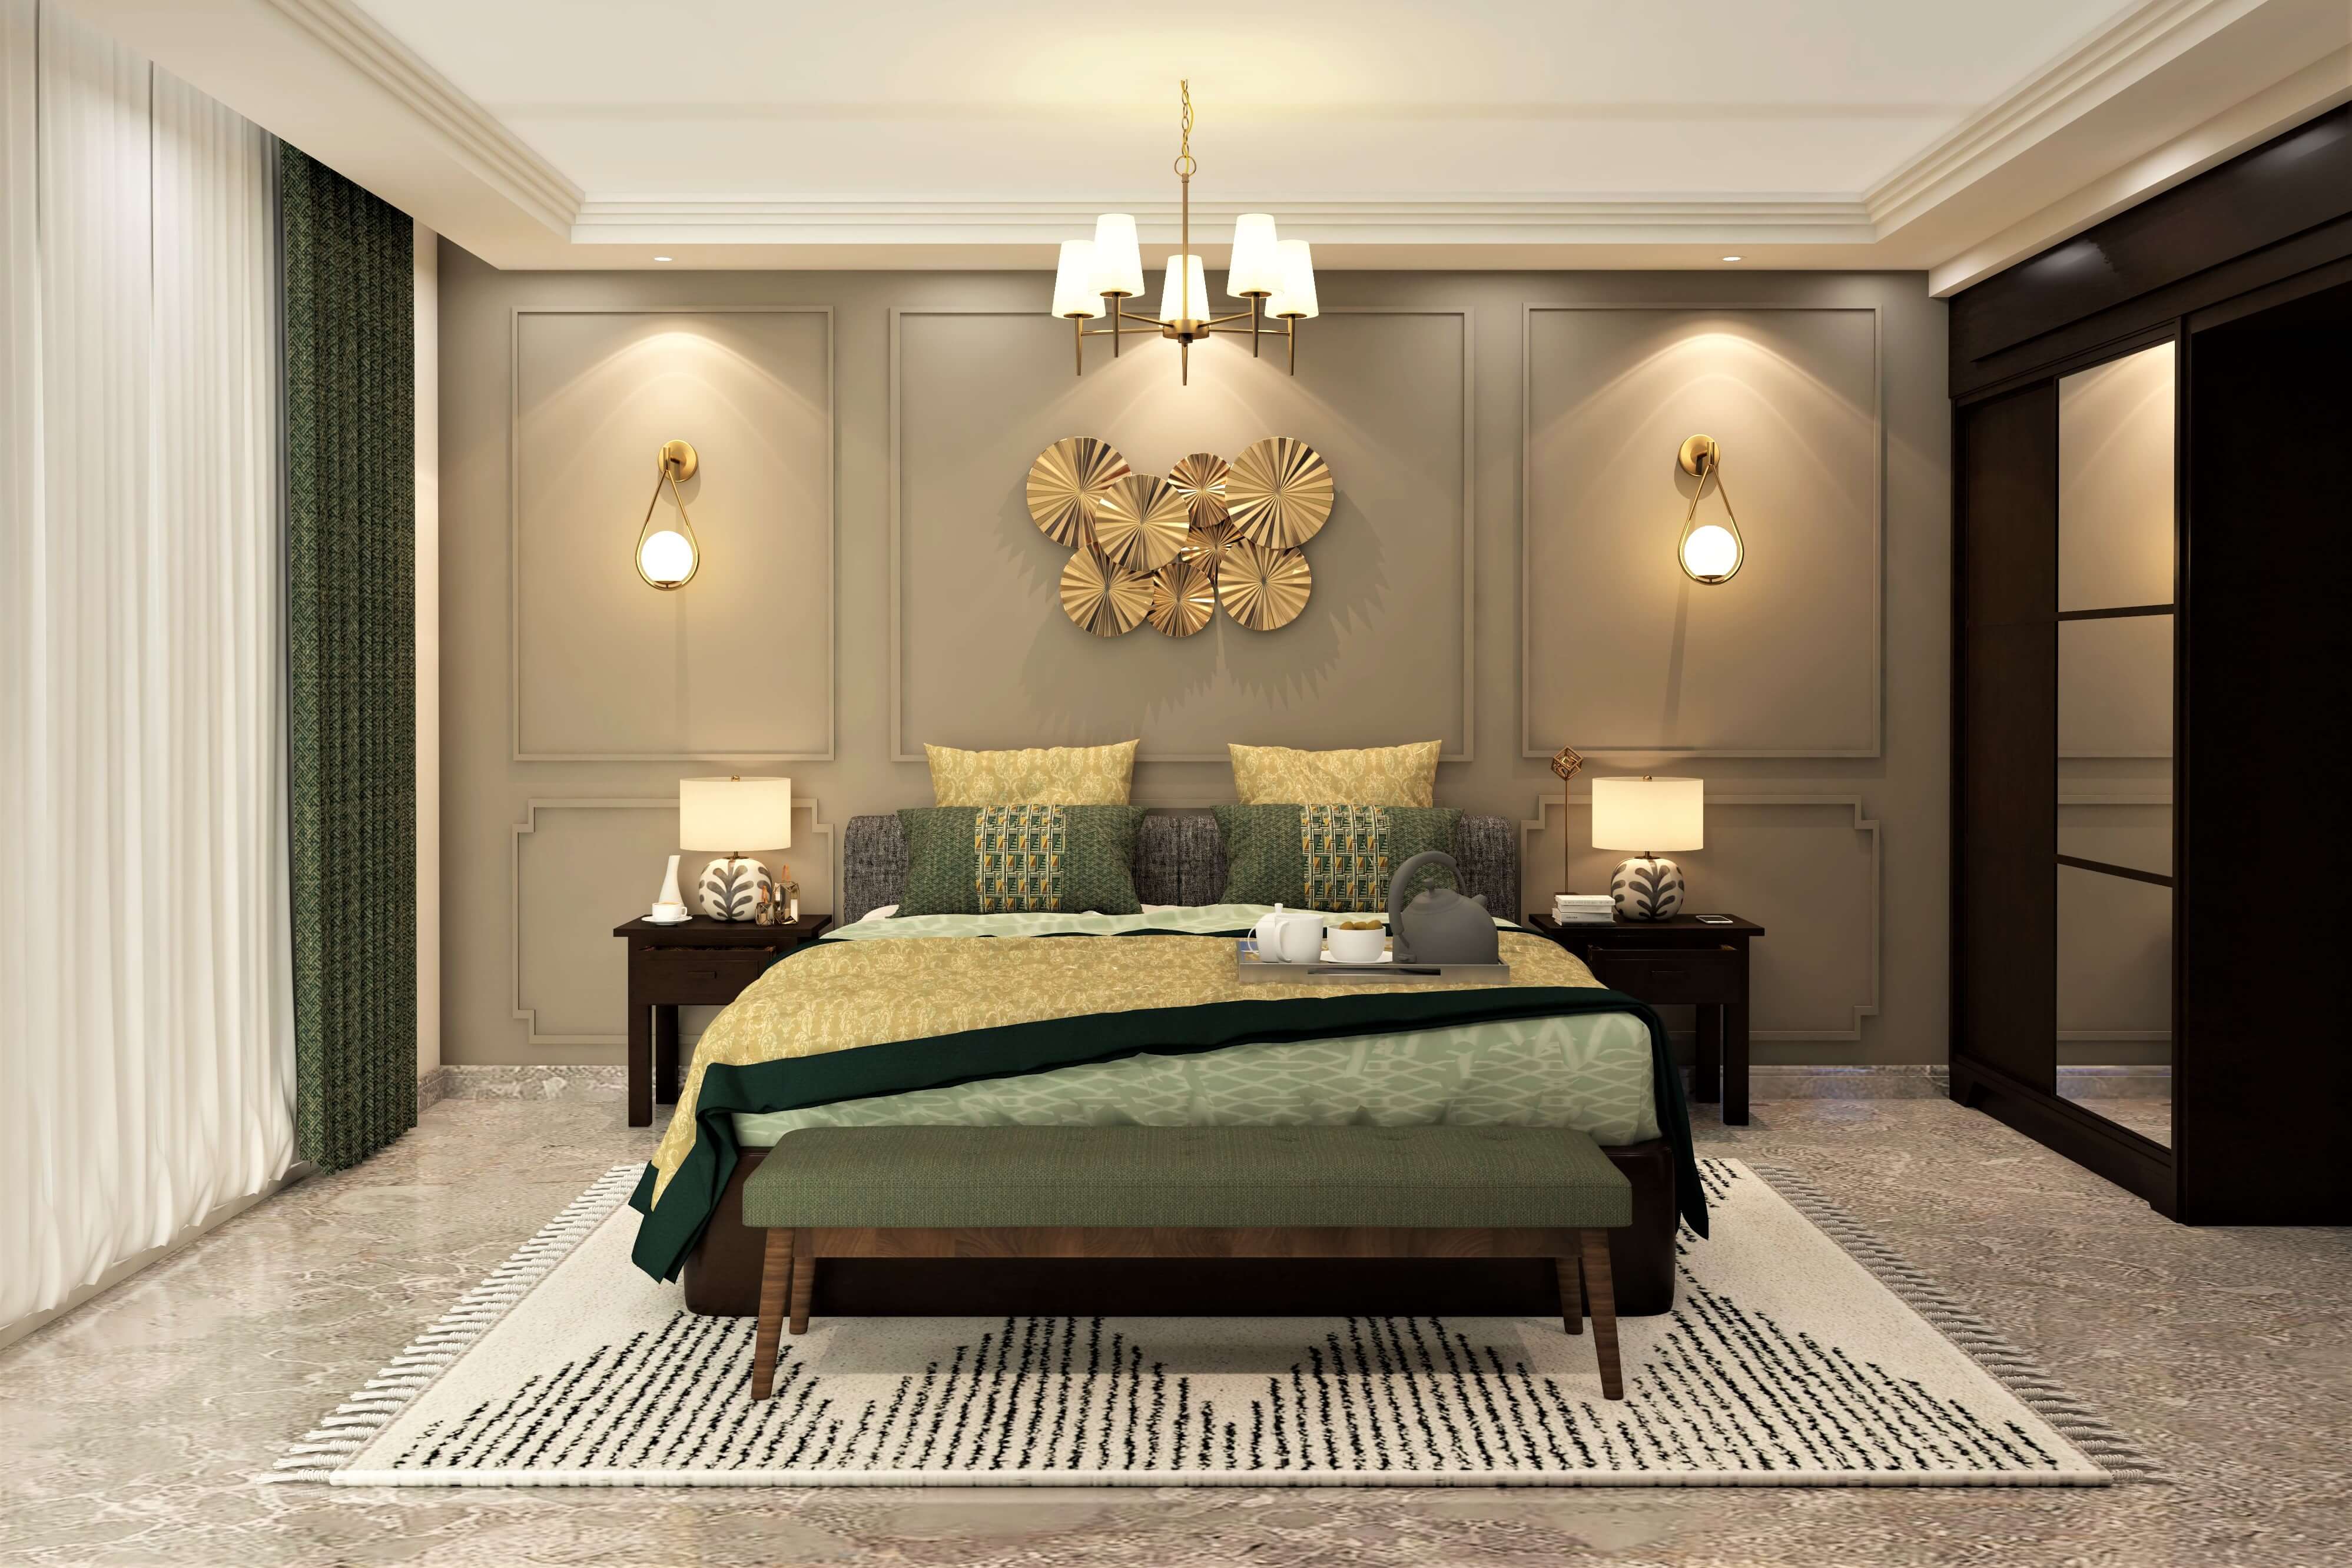 A Classic Modern Indian Bedroom Design 